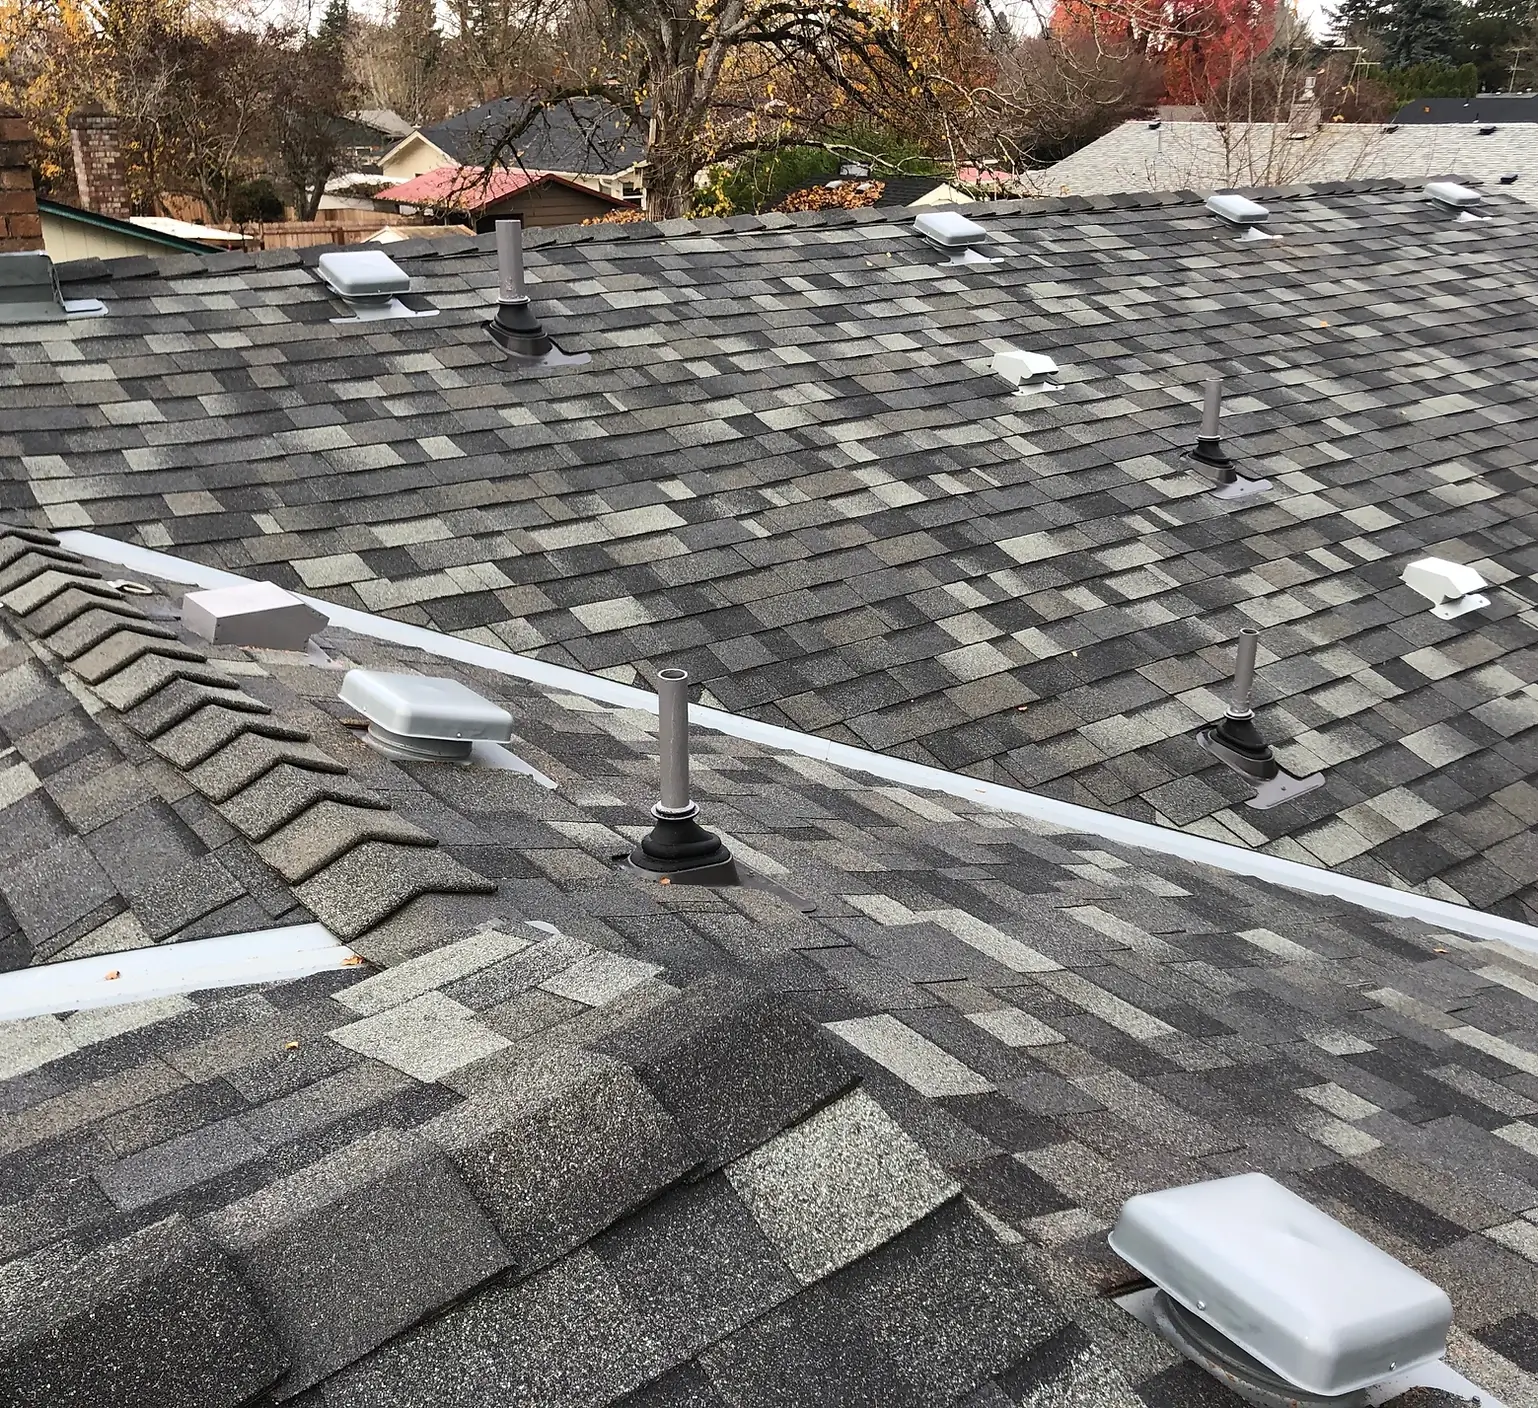 Image of shingles laid down on top of a roof